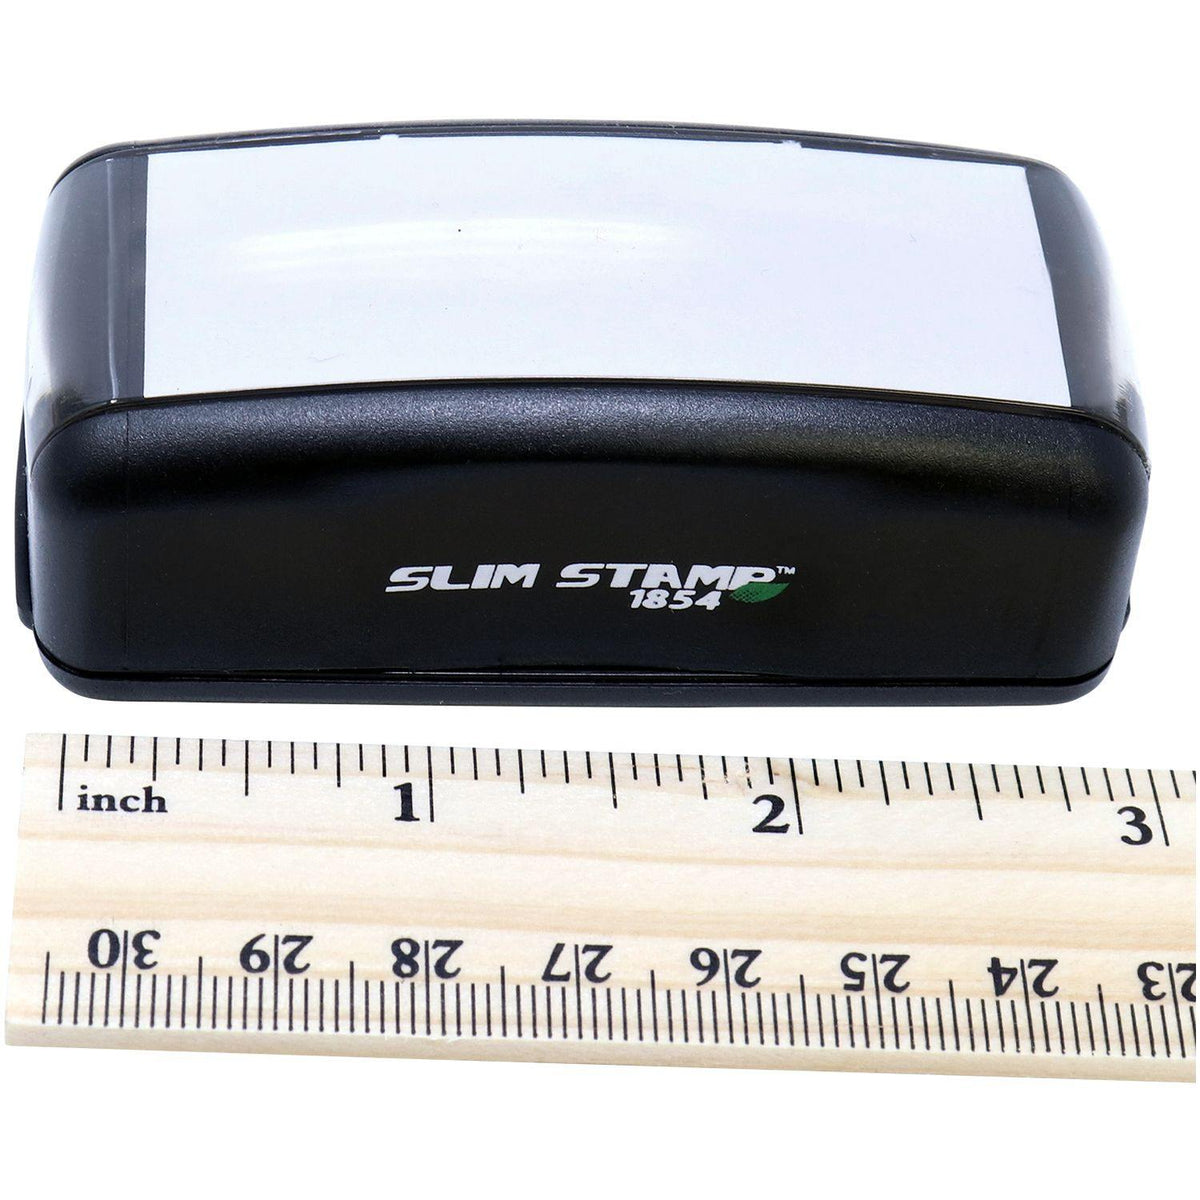 Measurement Large Pre Inked Way To Go Stamp with Ruler